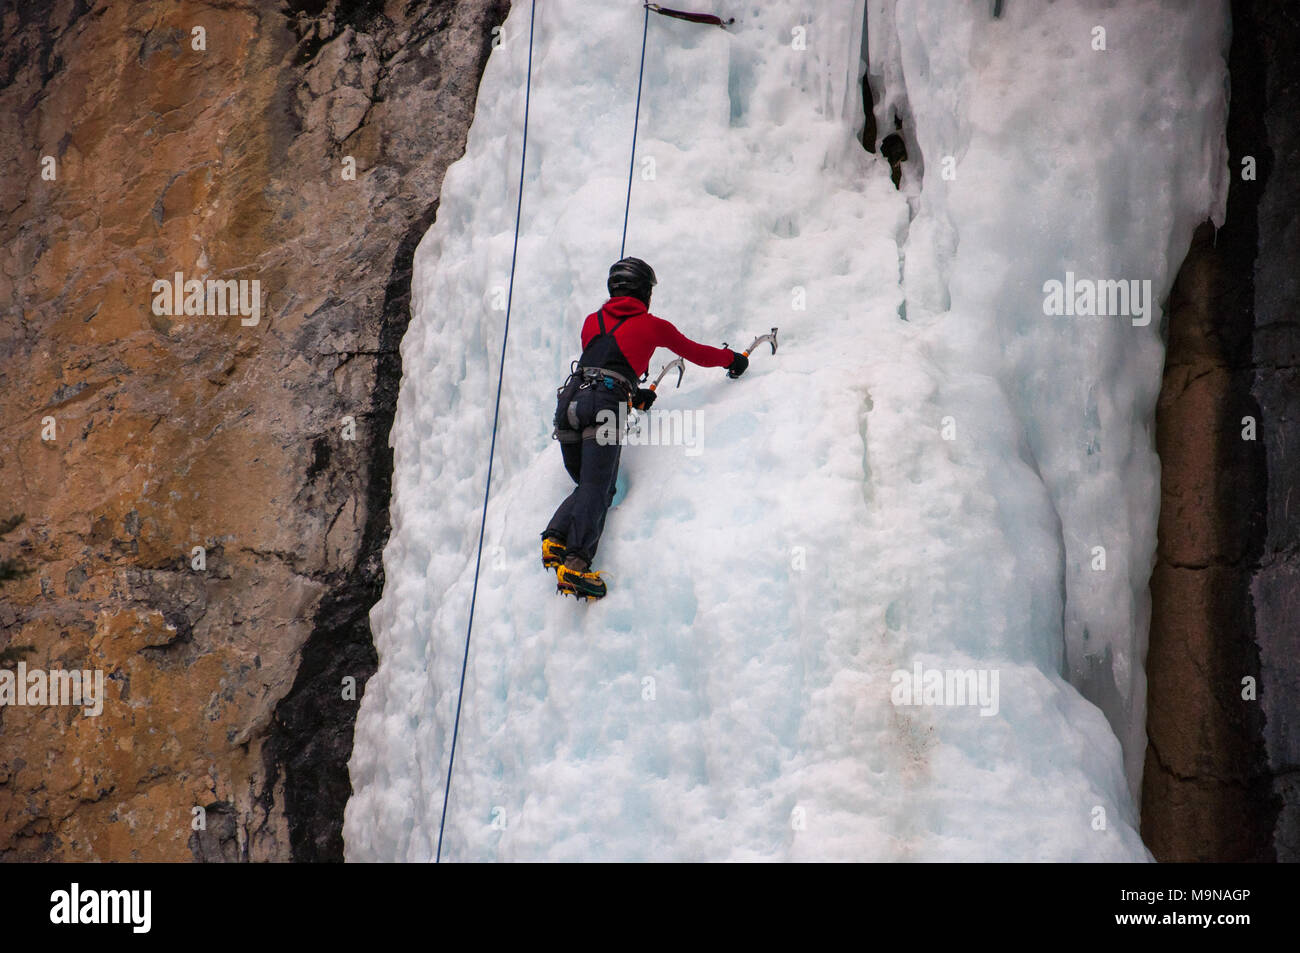 Ice Climbers in Grotte Canyon in der Nähe von Canmore, Alberta. Stockfoto